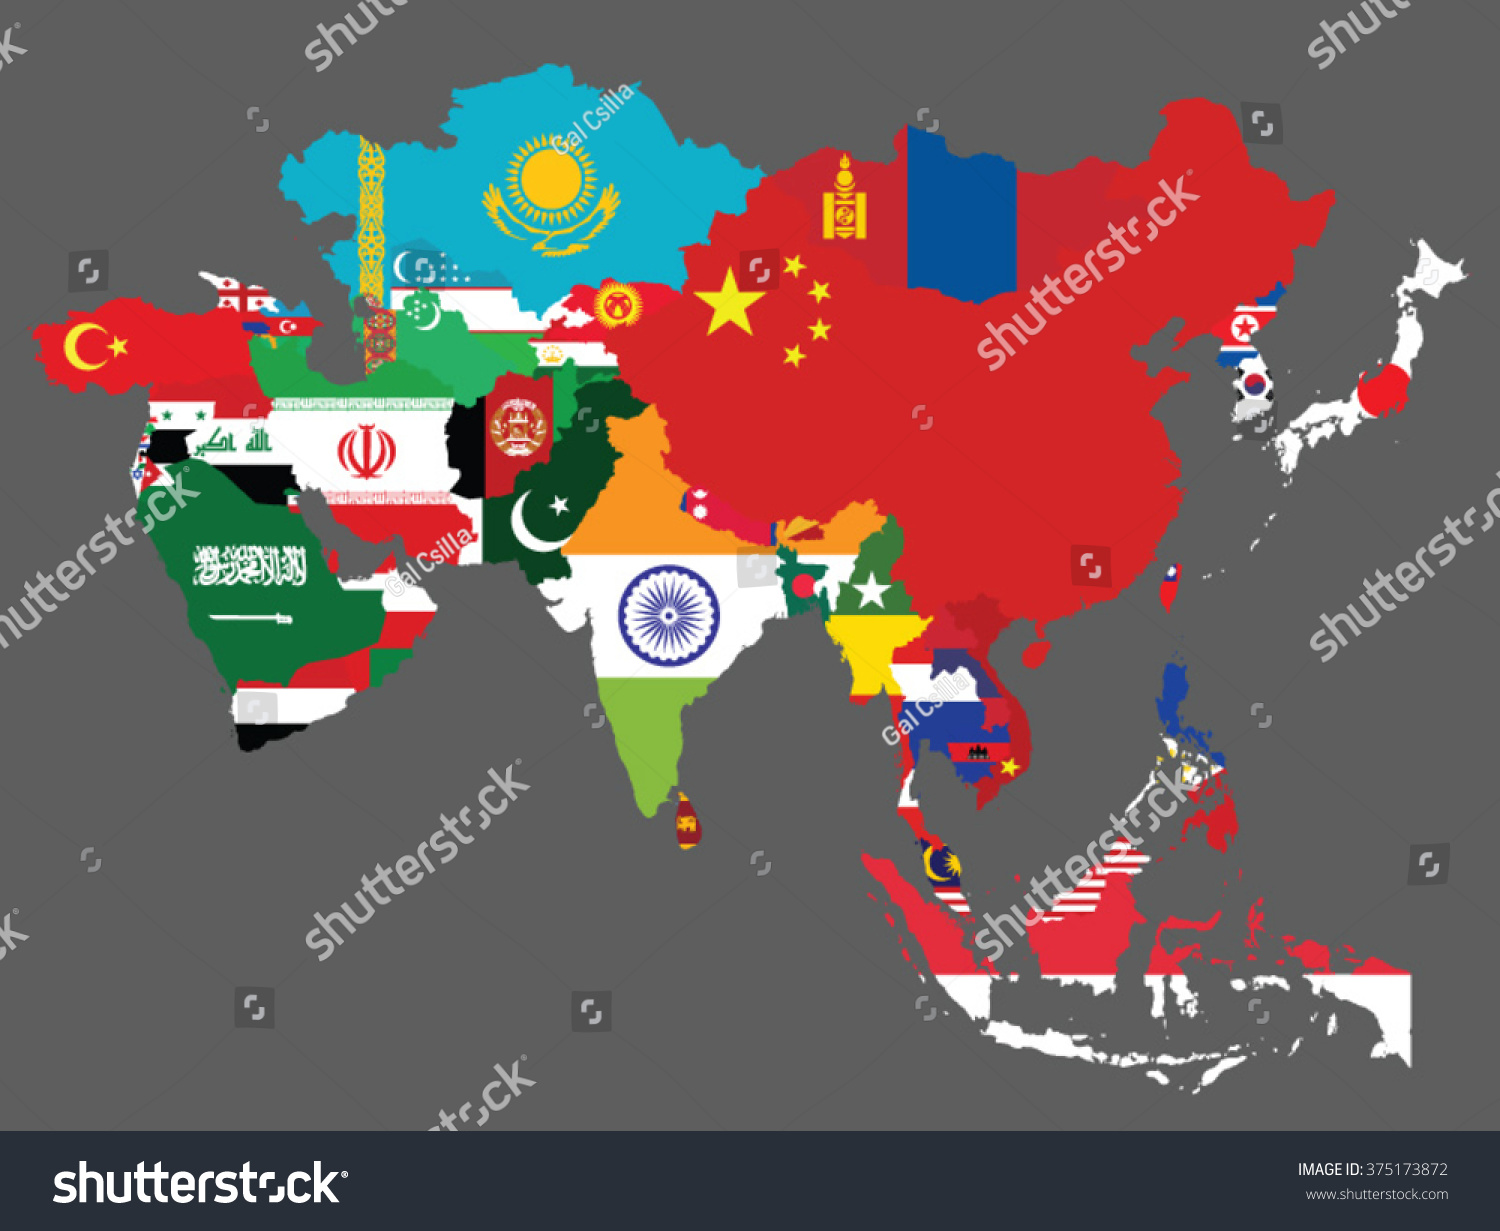 Countries asia Asia: The